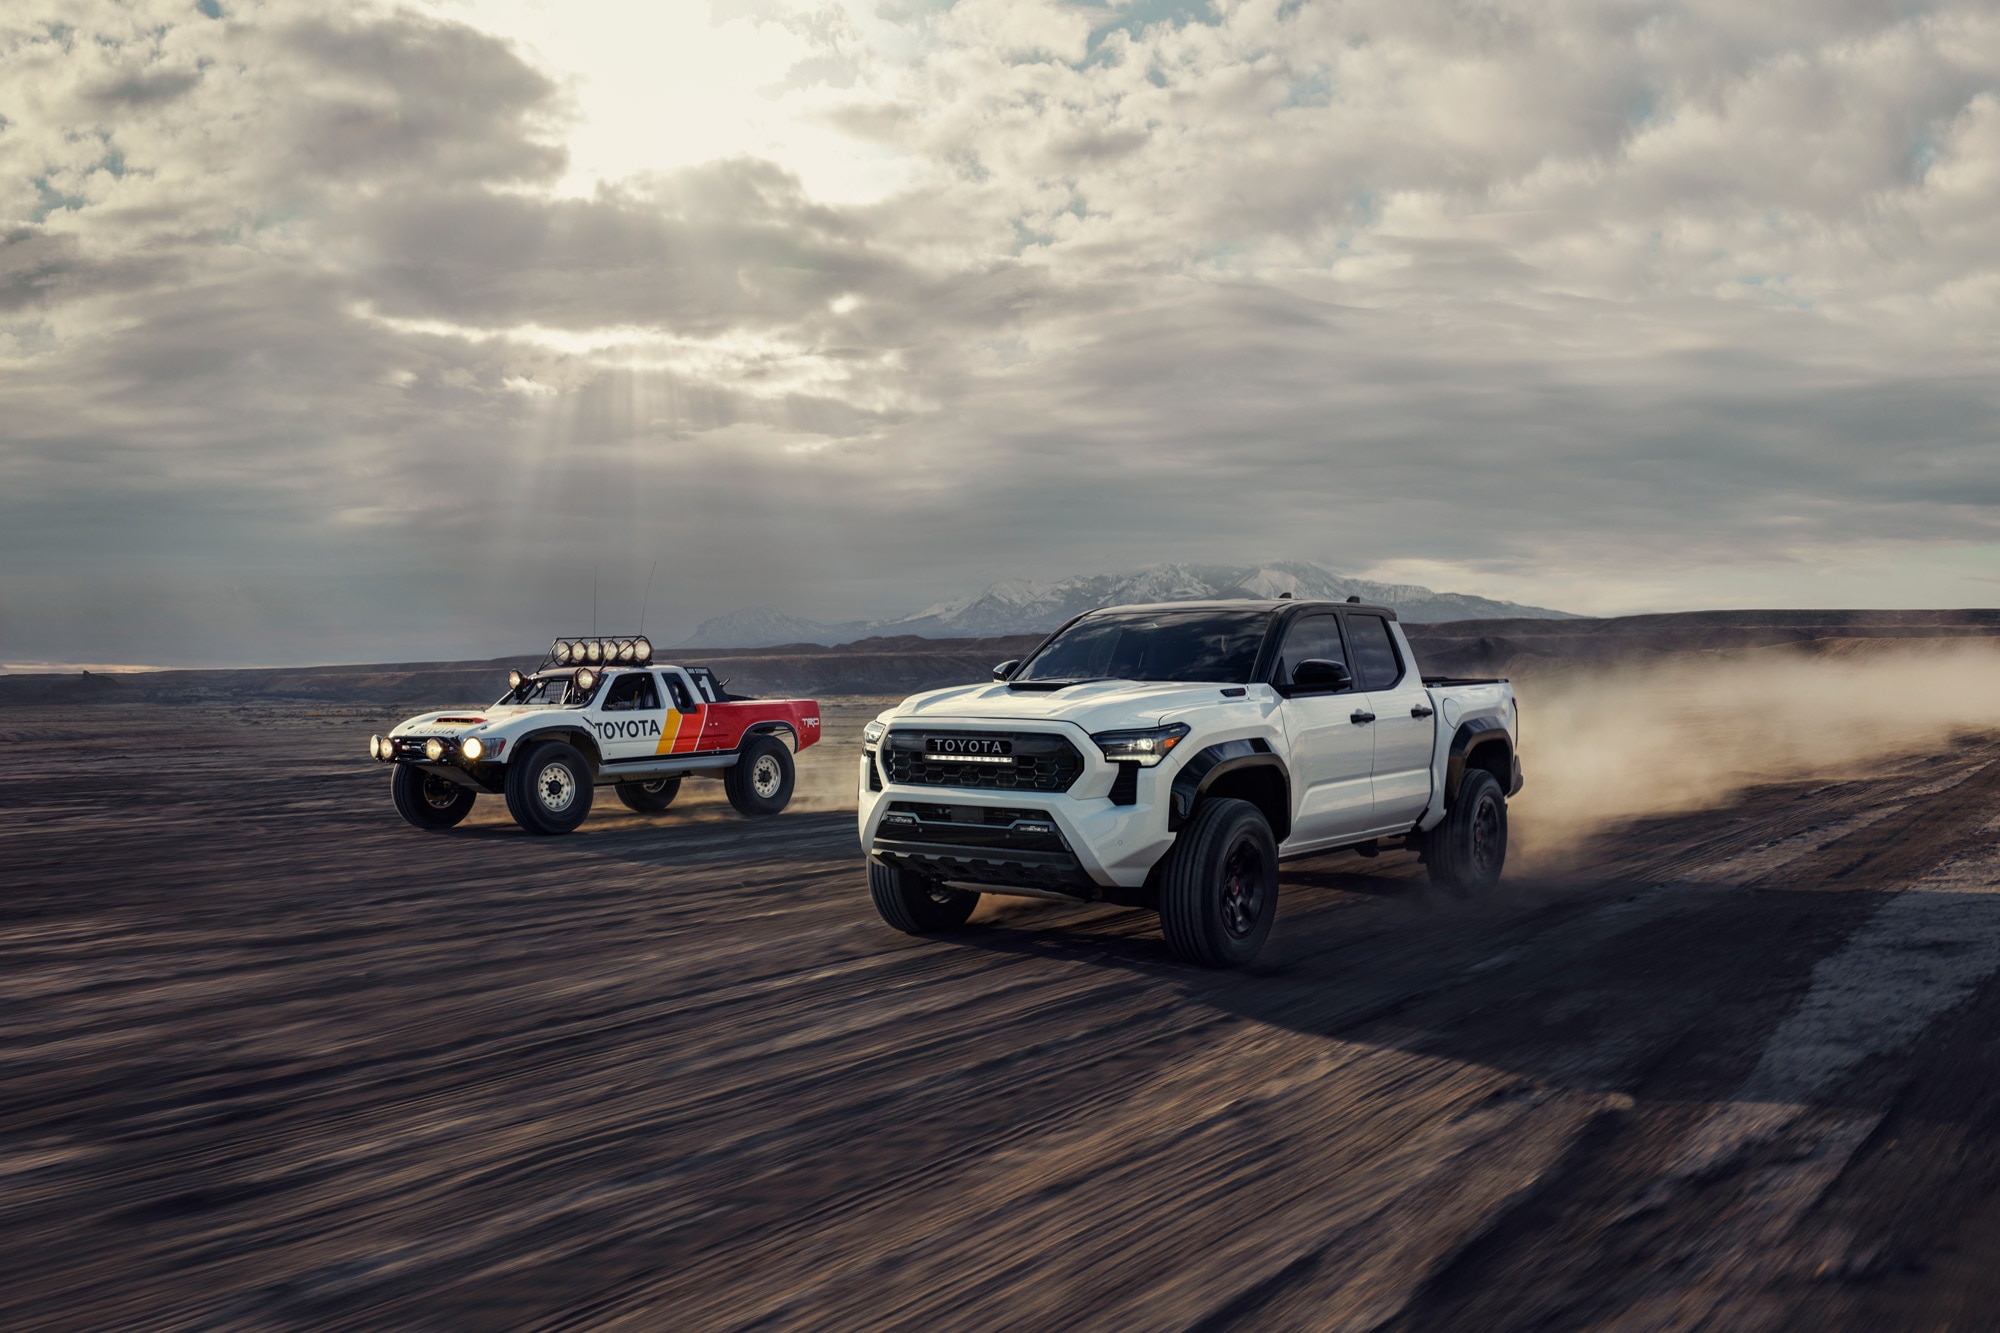 New and old Toyota TRD trucks driving off-road.